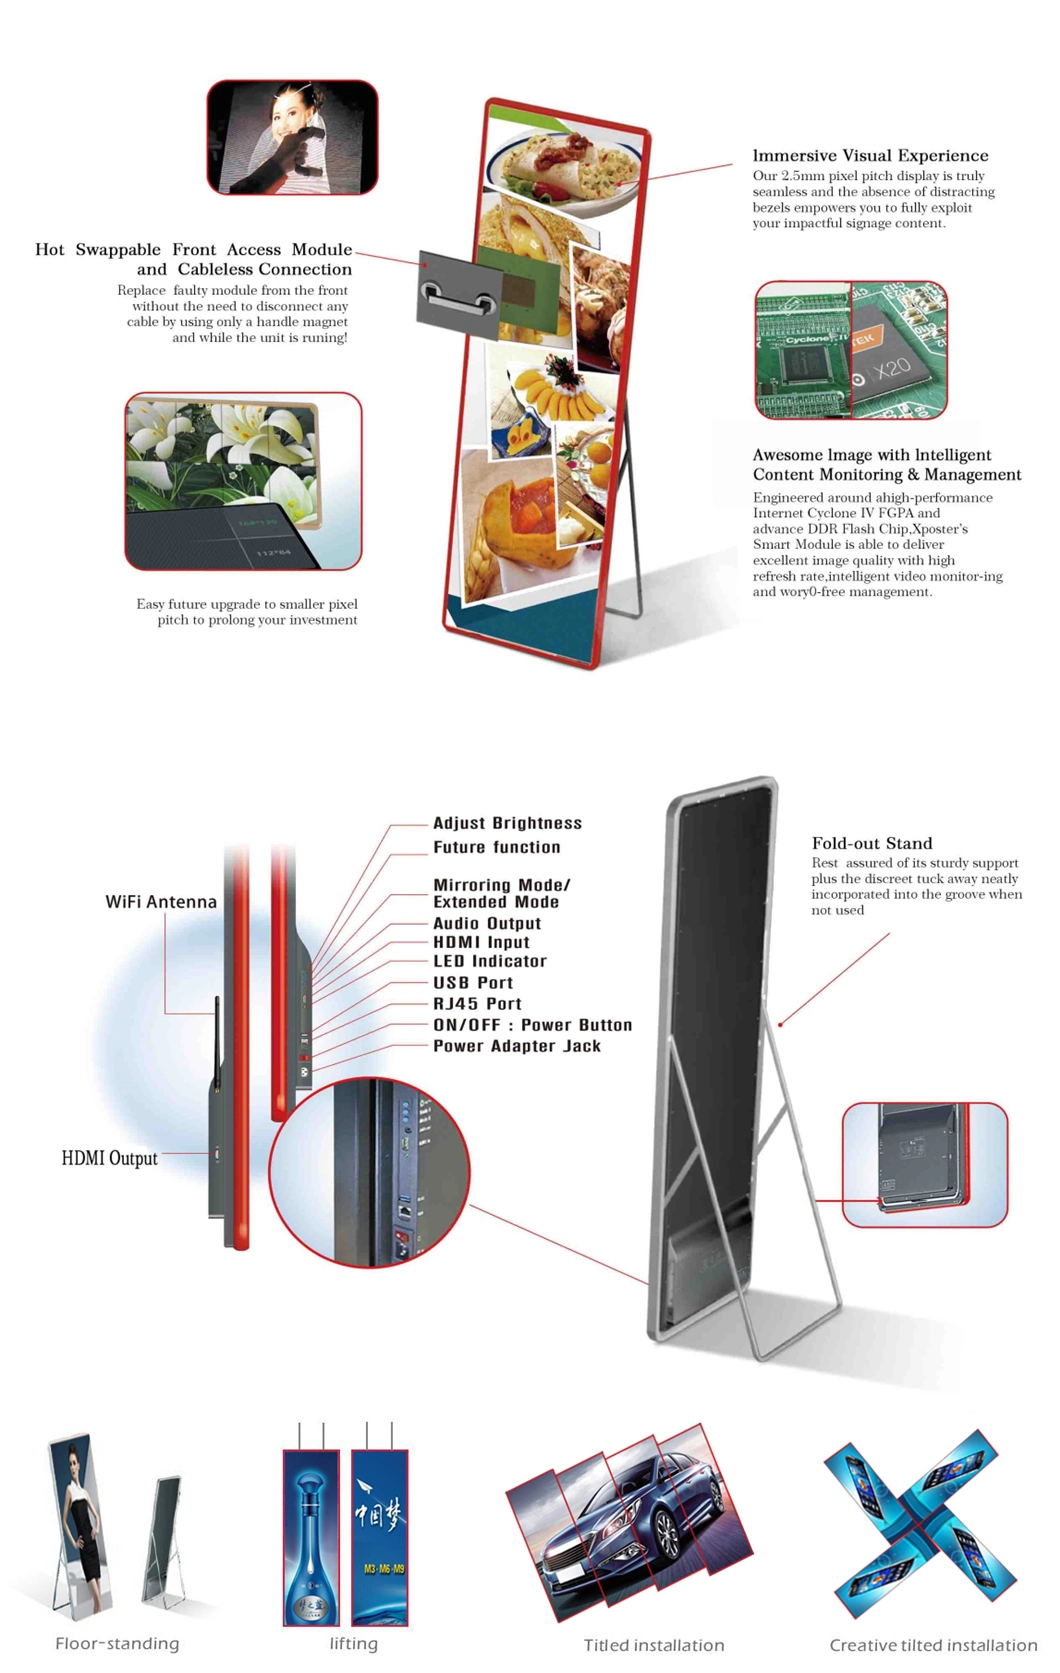 Totem Exterior Outdoor Vertical Publicidad LED Digital Standing Poster Screen Signage for Advertising